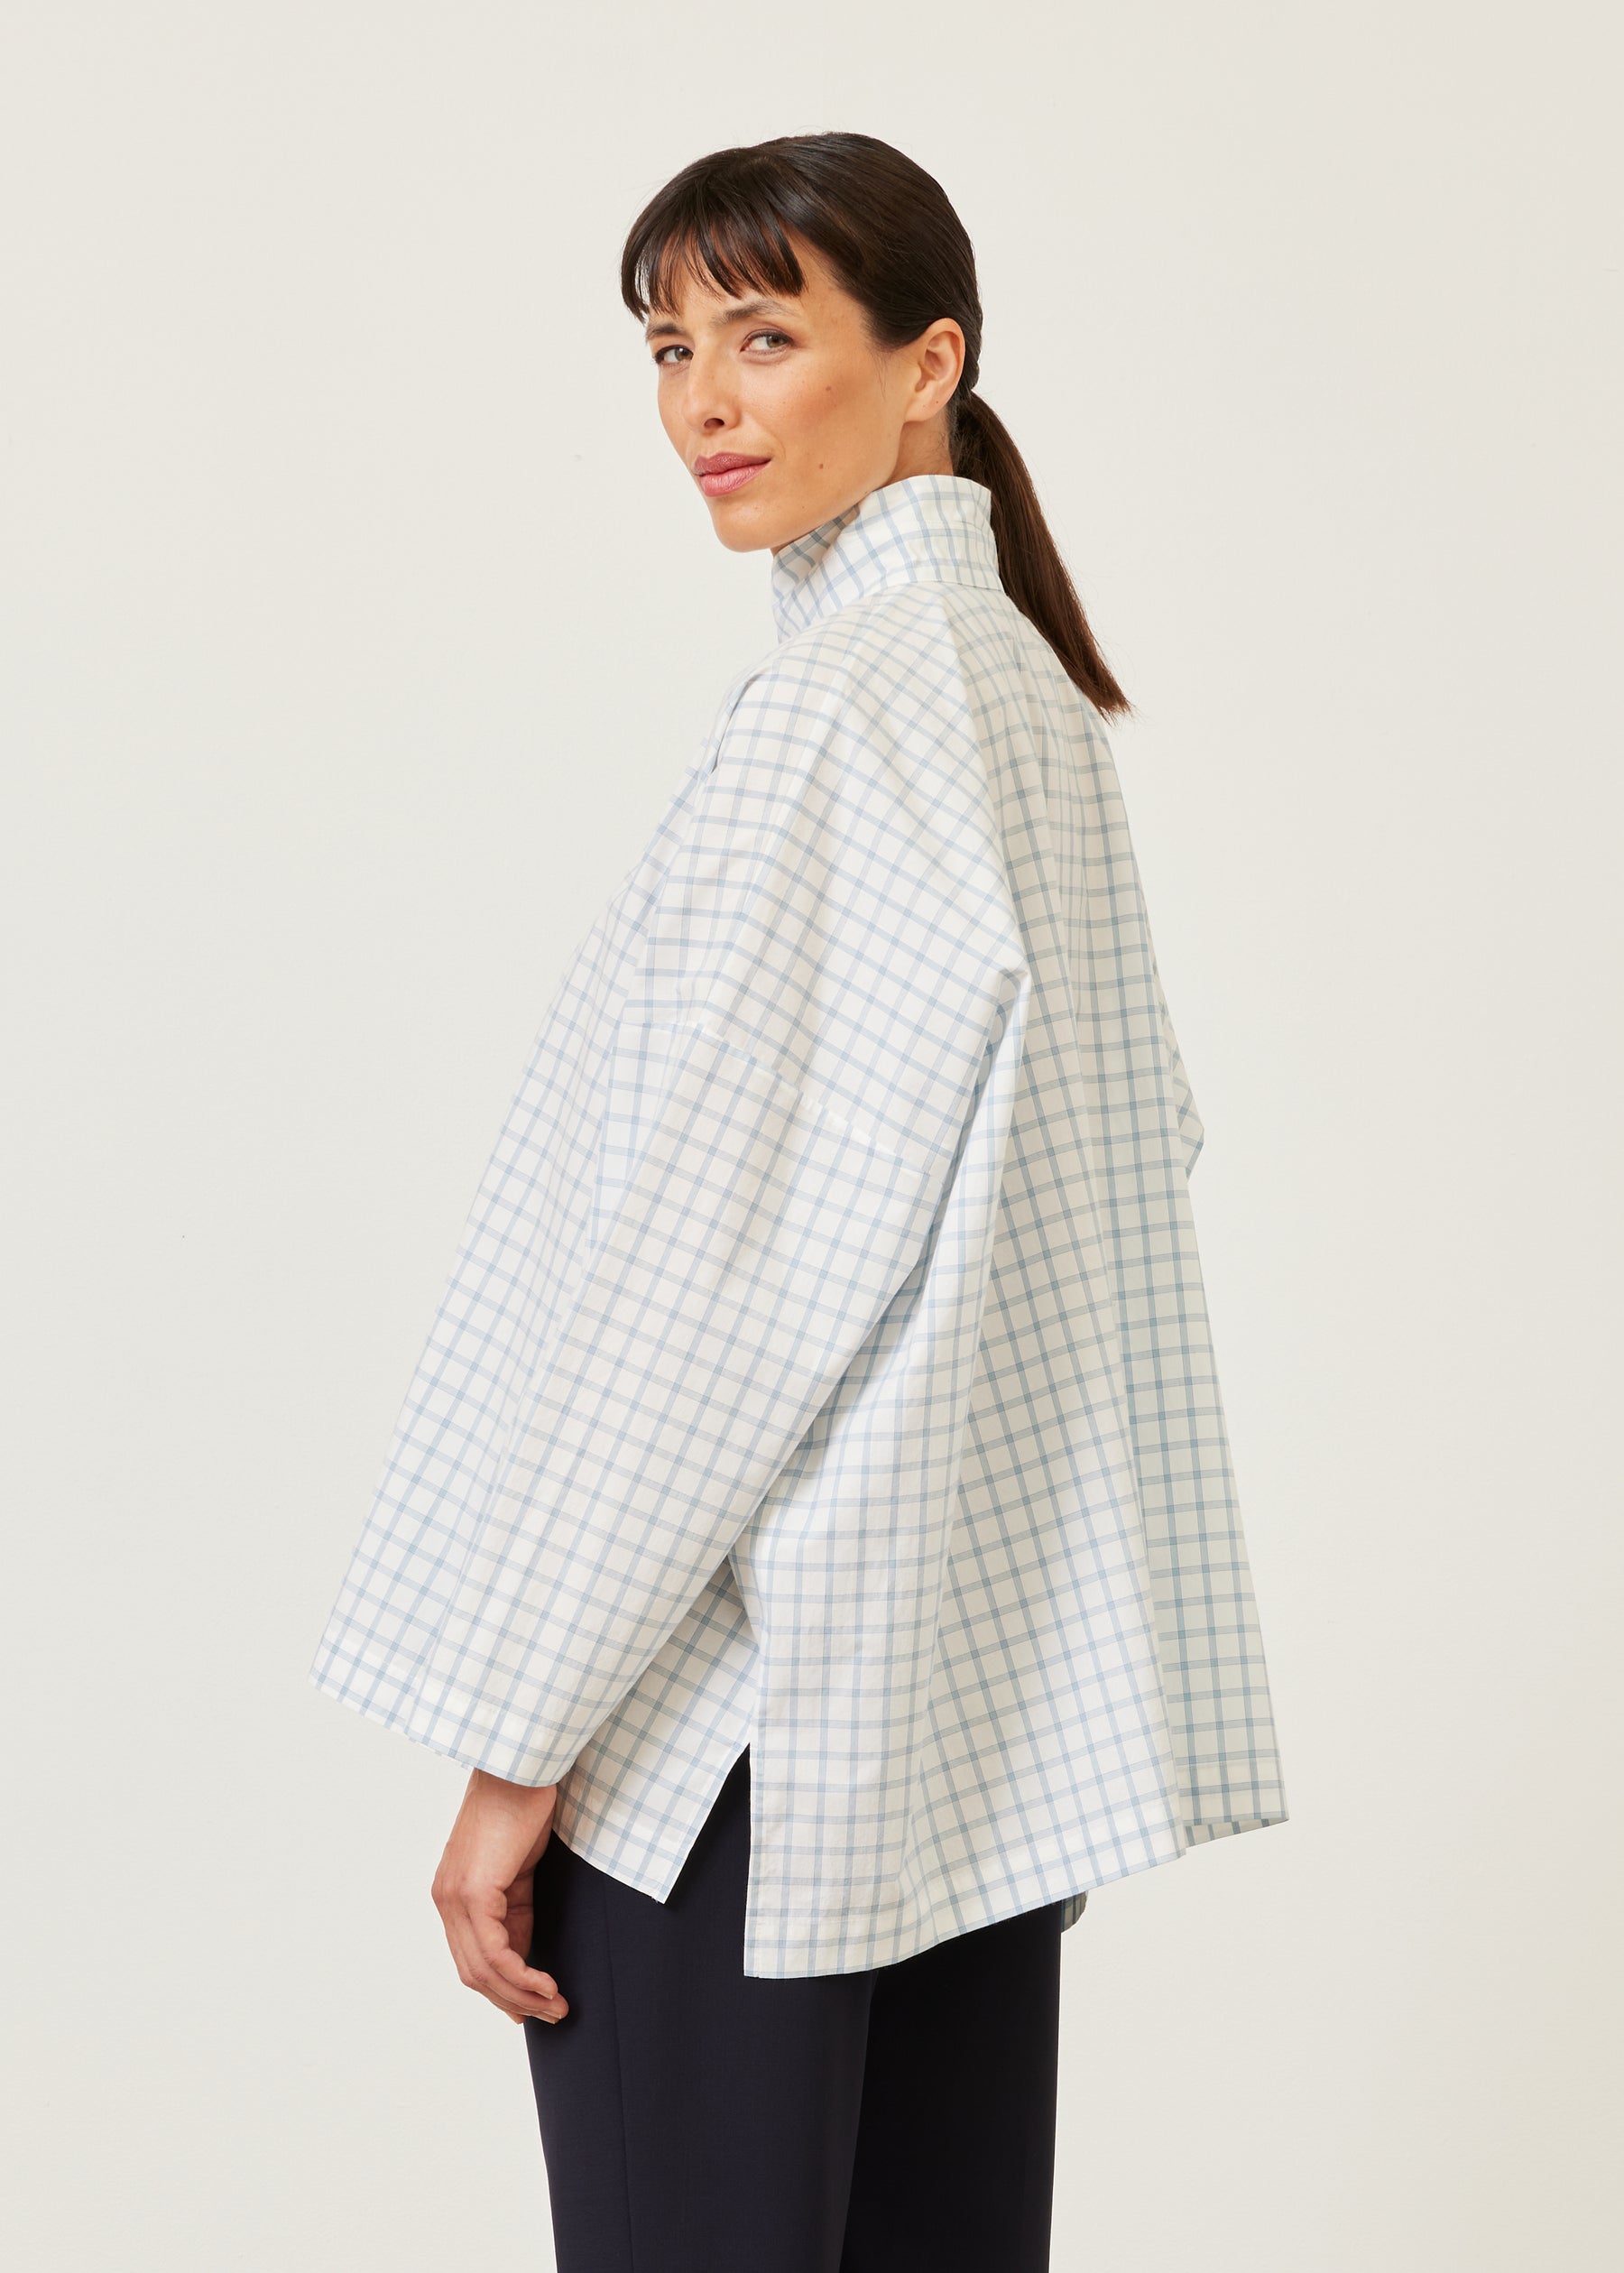 wide longer back double stand collar shirt - mid plus